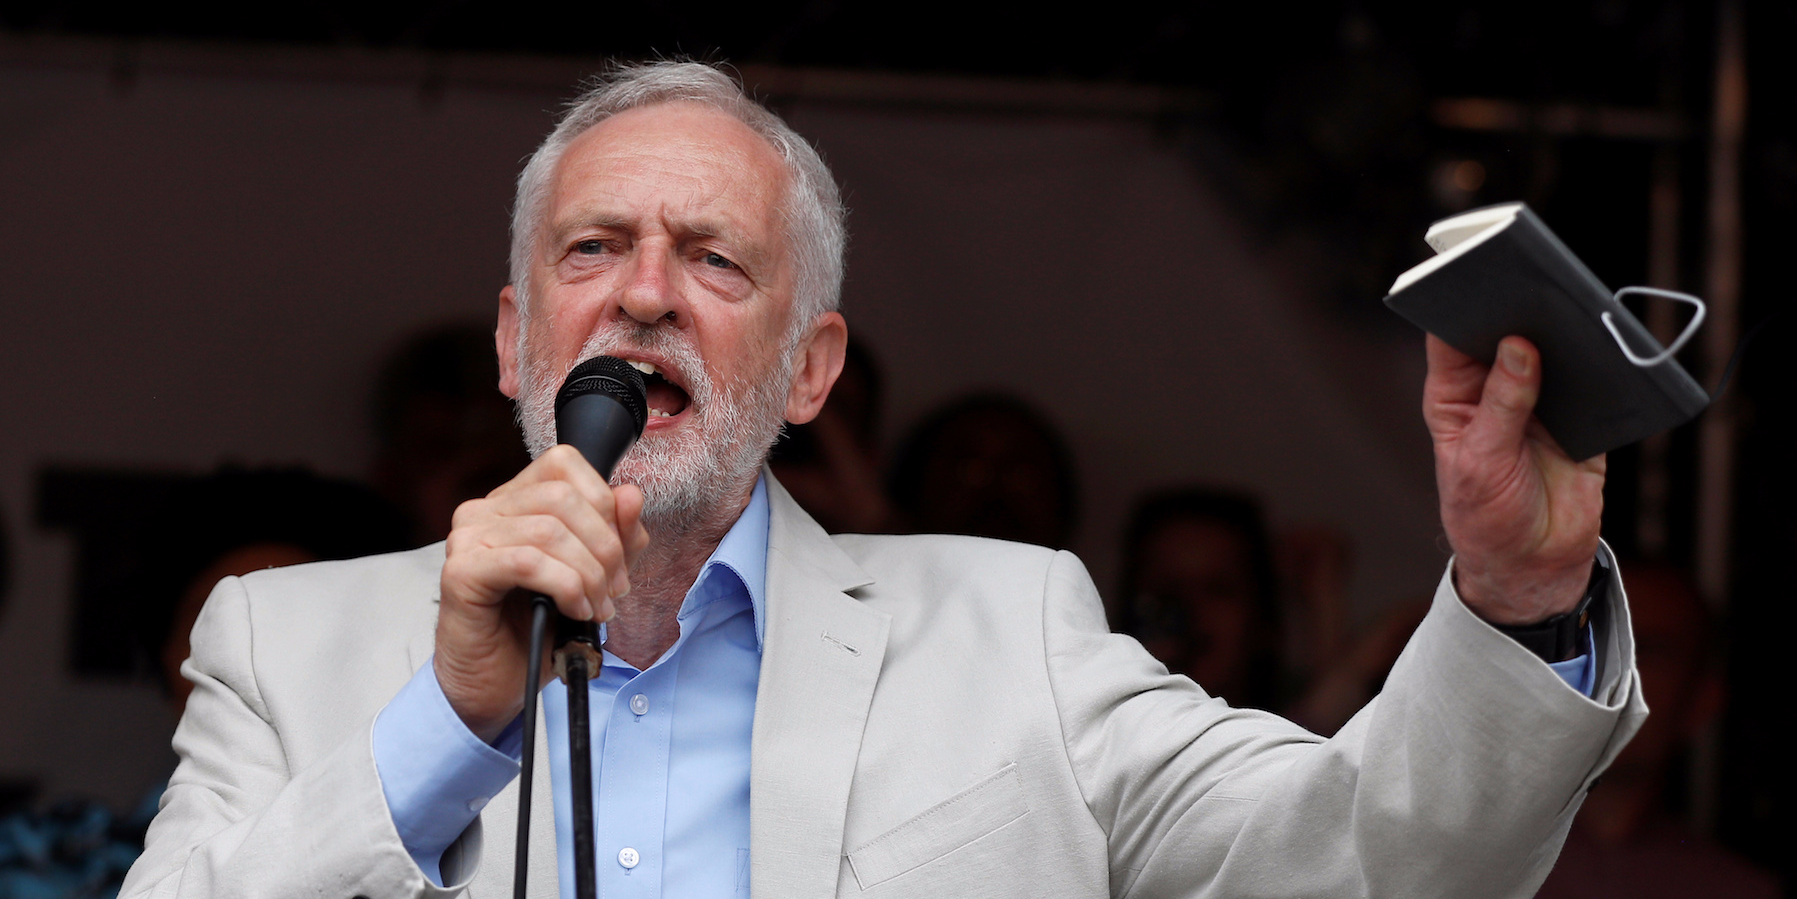 Labour leader Jeremy Corbyn speaks at an anti-austerity rally